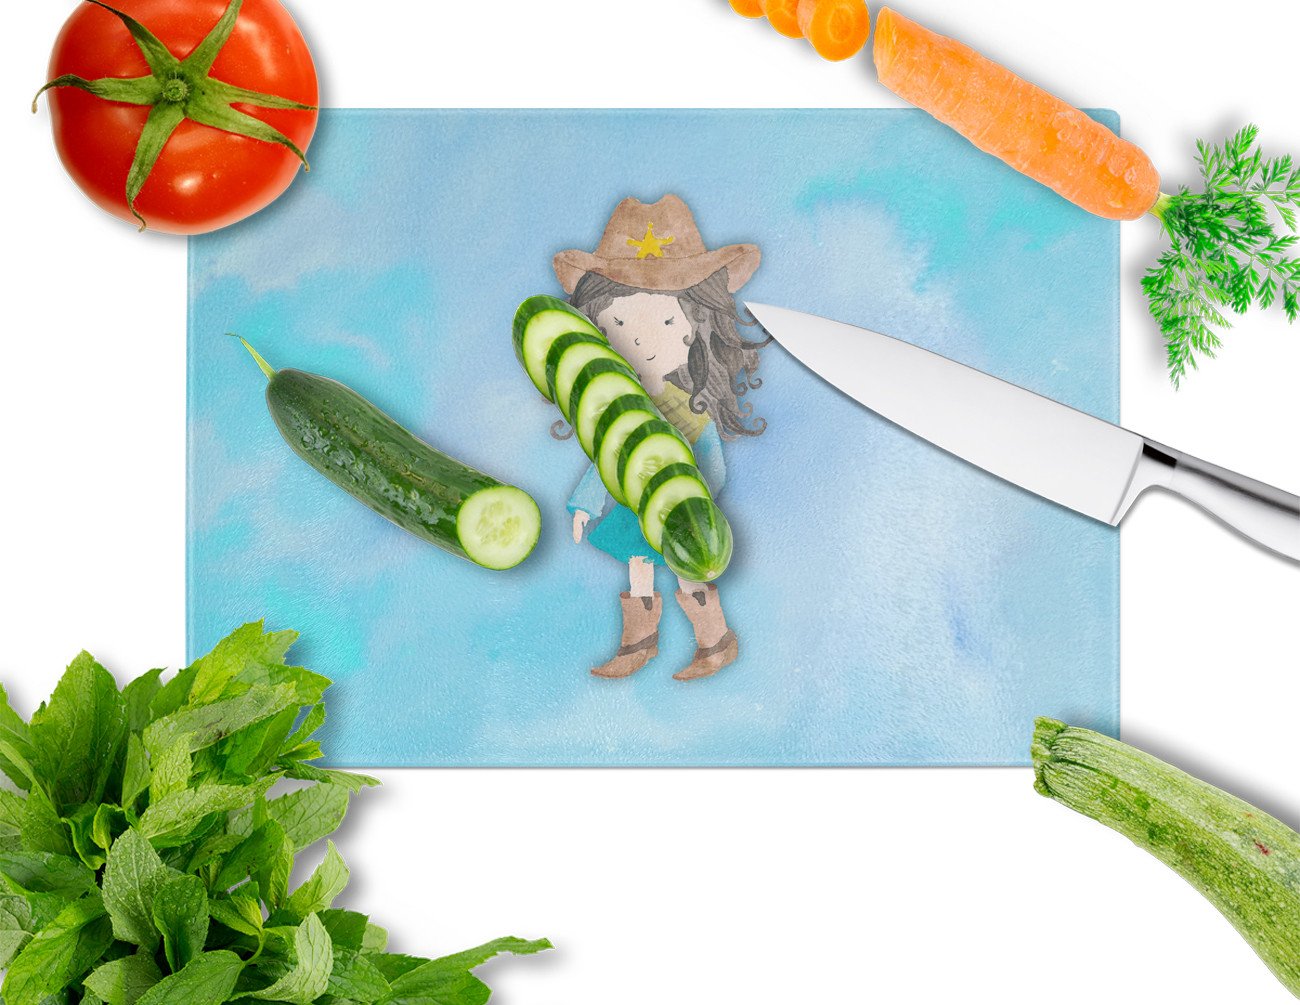 Cowgirl Watercolor Glass Cutting Board Large BB7367LCB by Caroline's Treasures